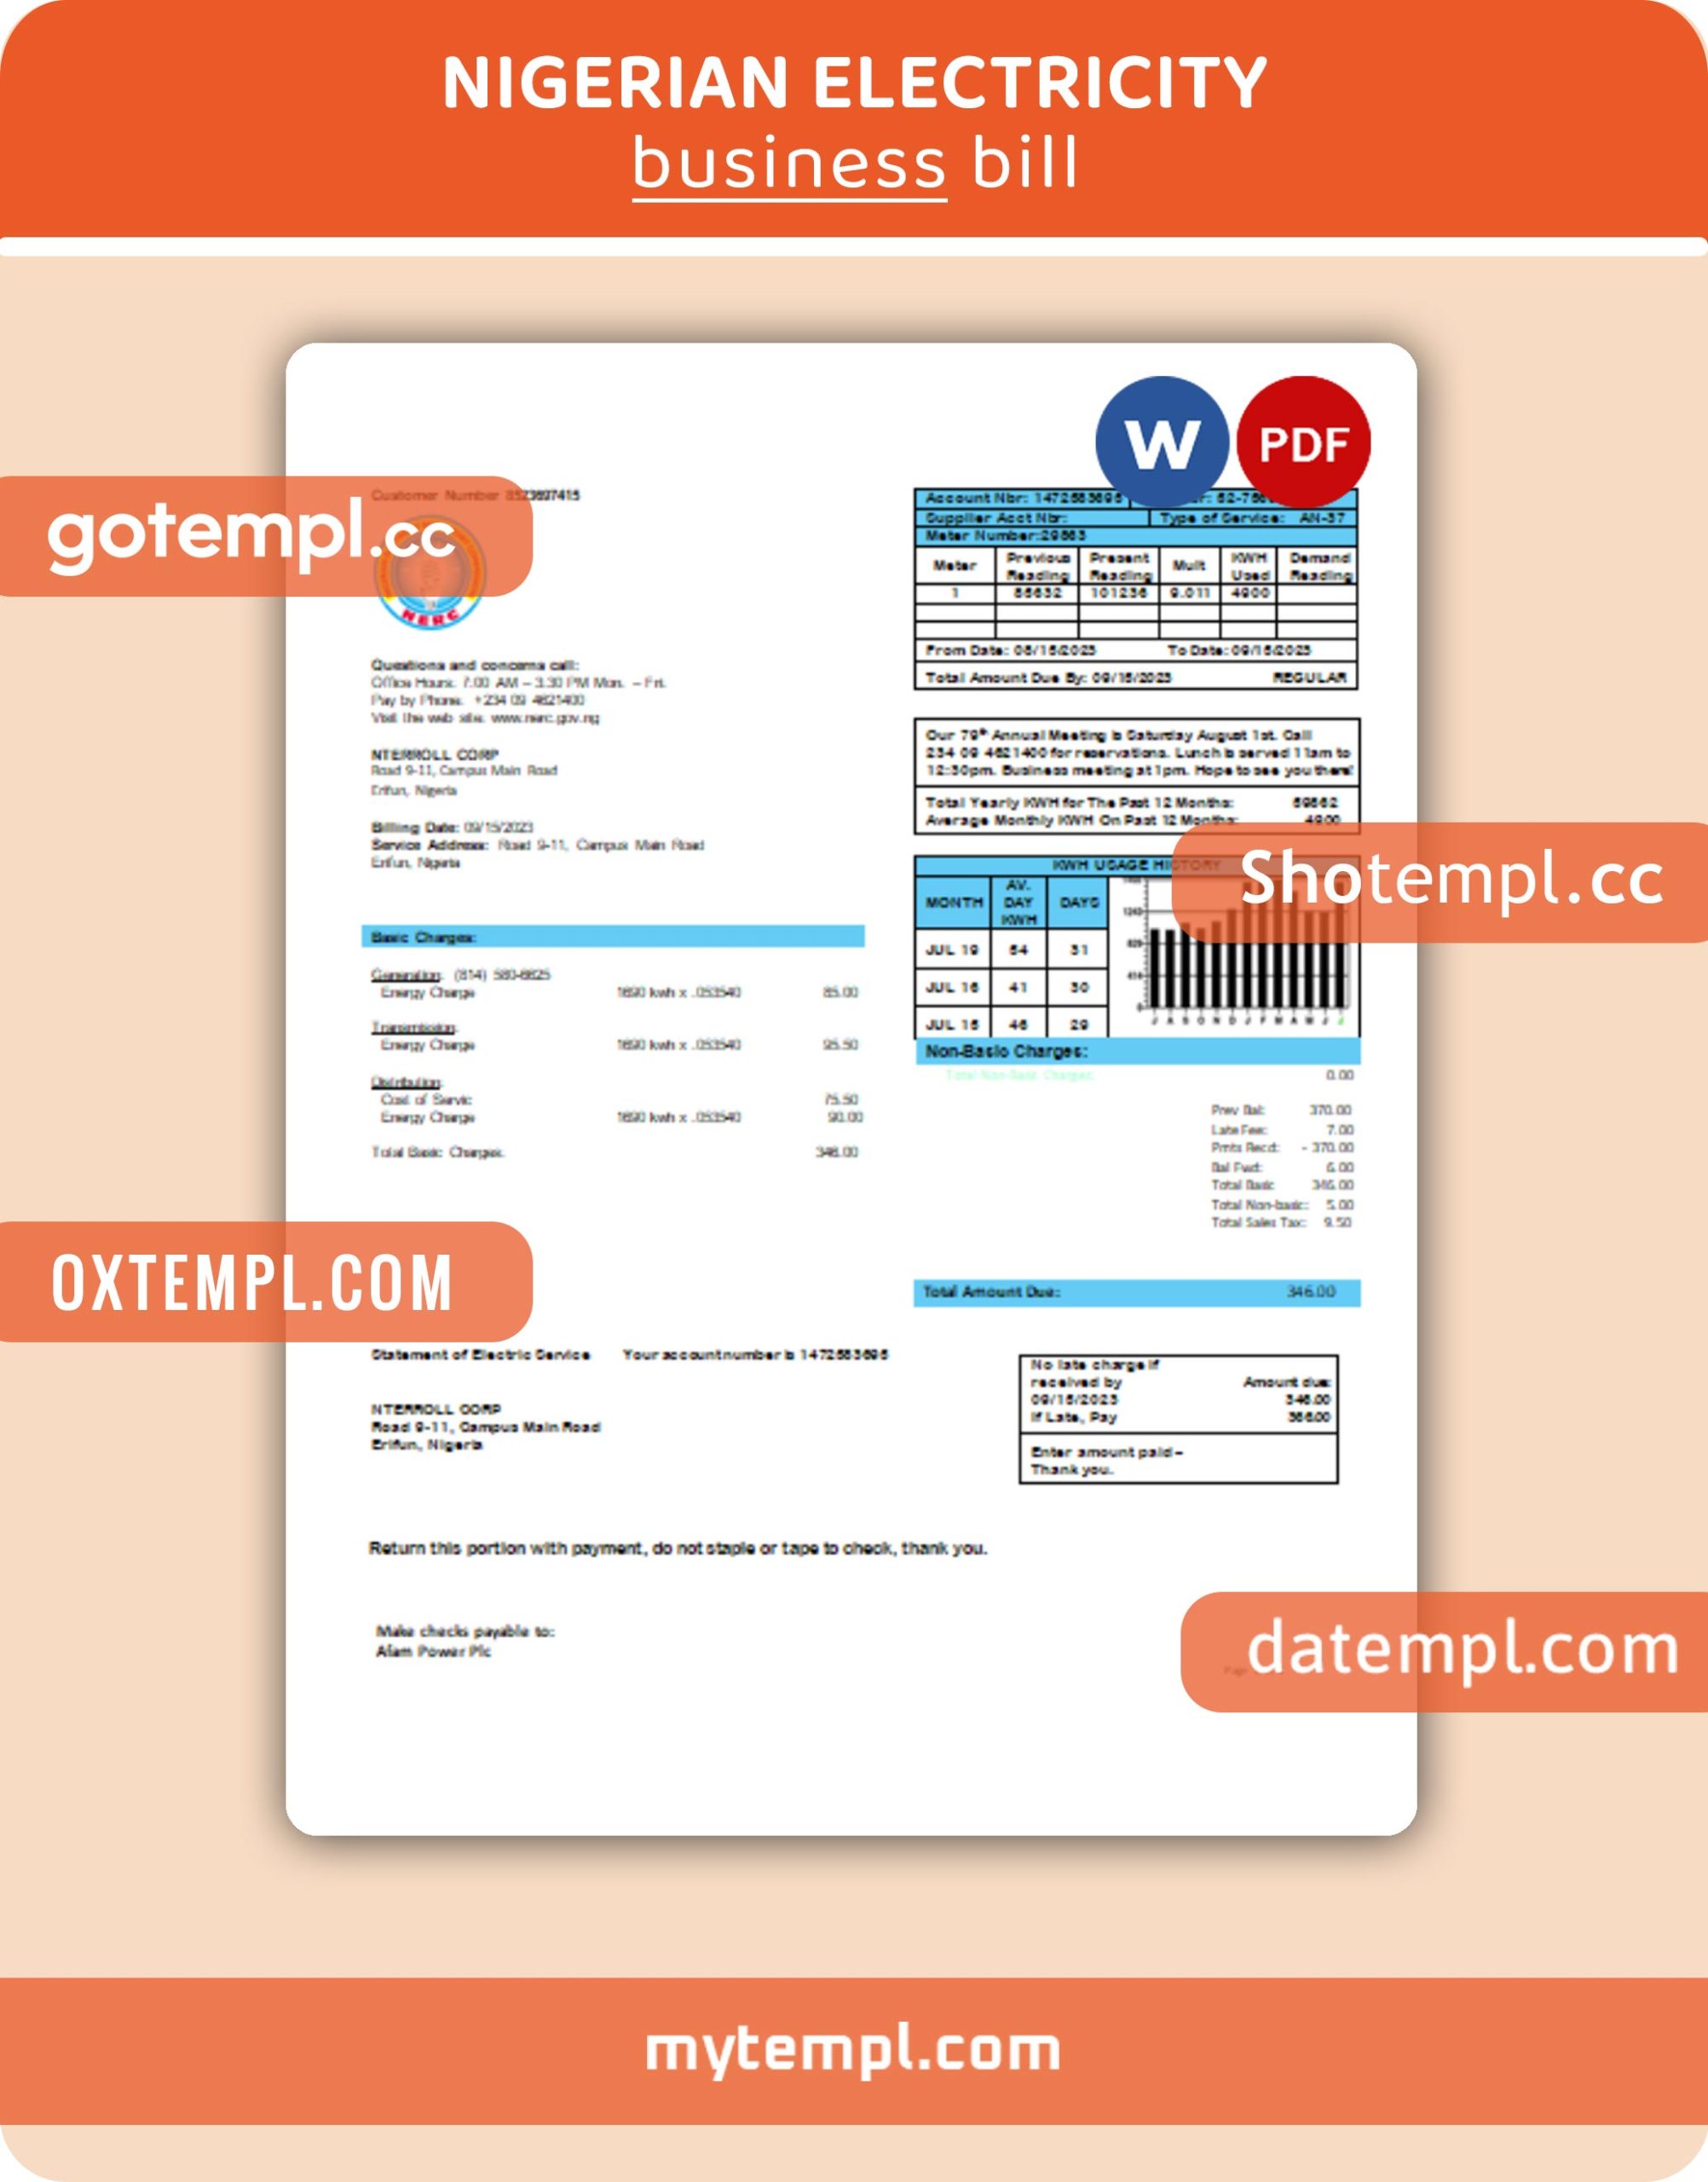 USA DL Services invoice template in Word and PDF format, fully editable